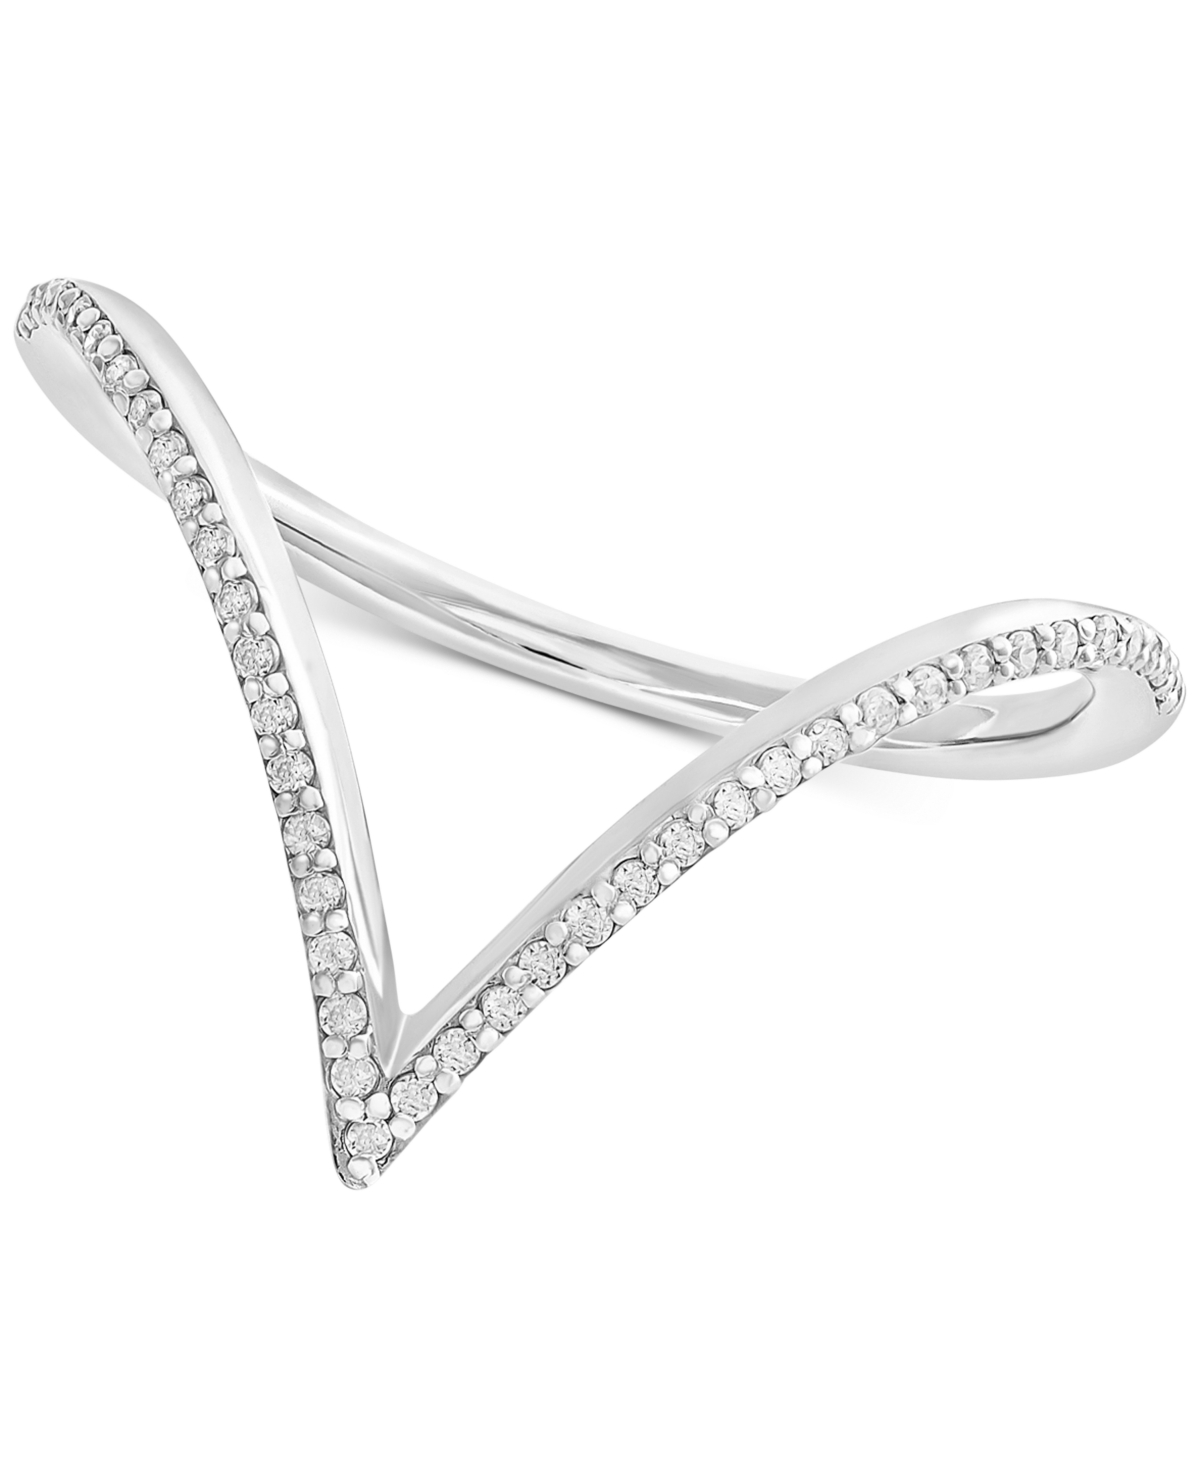 Diamond V-Shaped Ring in 10k White Gold (1/6 ct. t.w.), Created for Macy's - White Gold